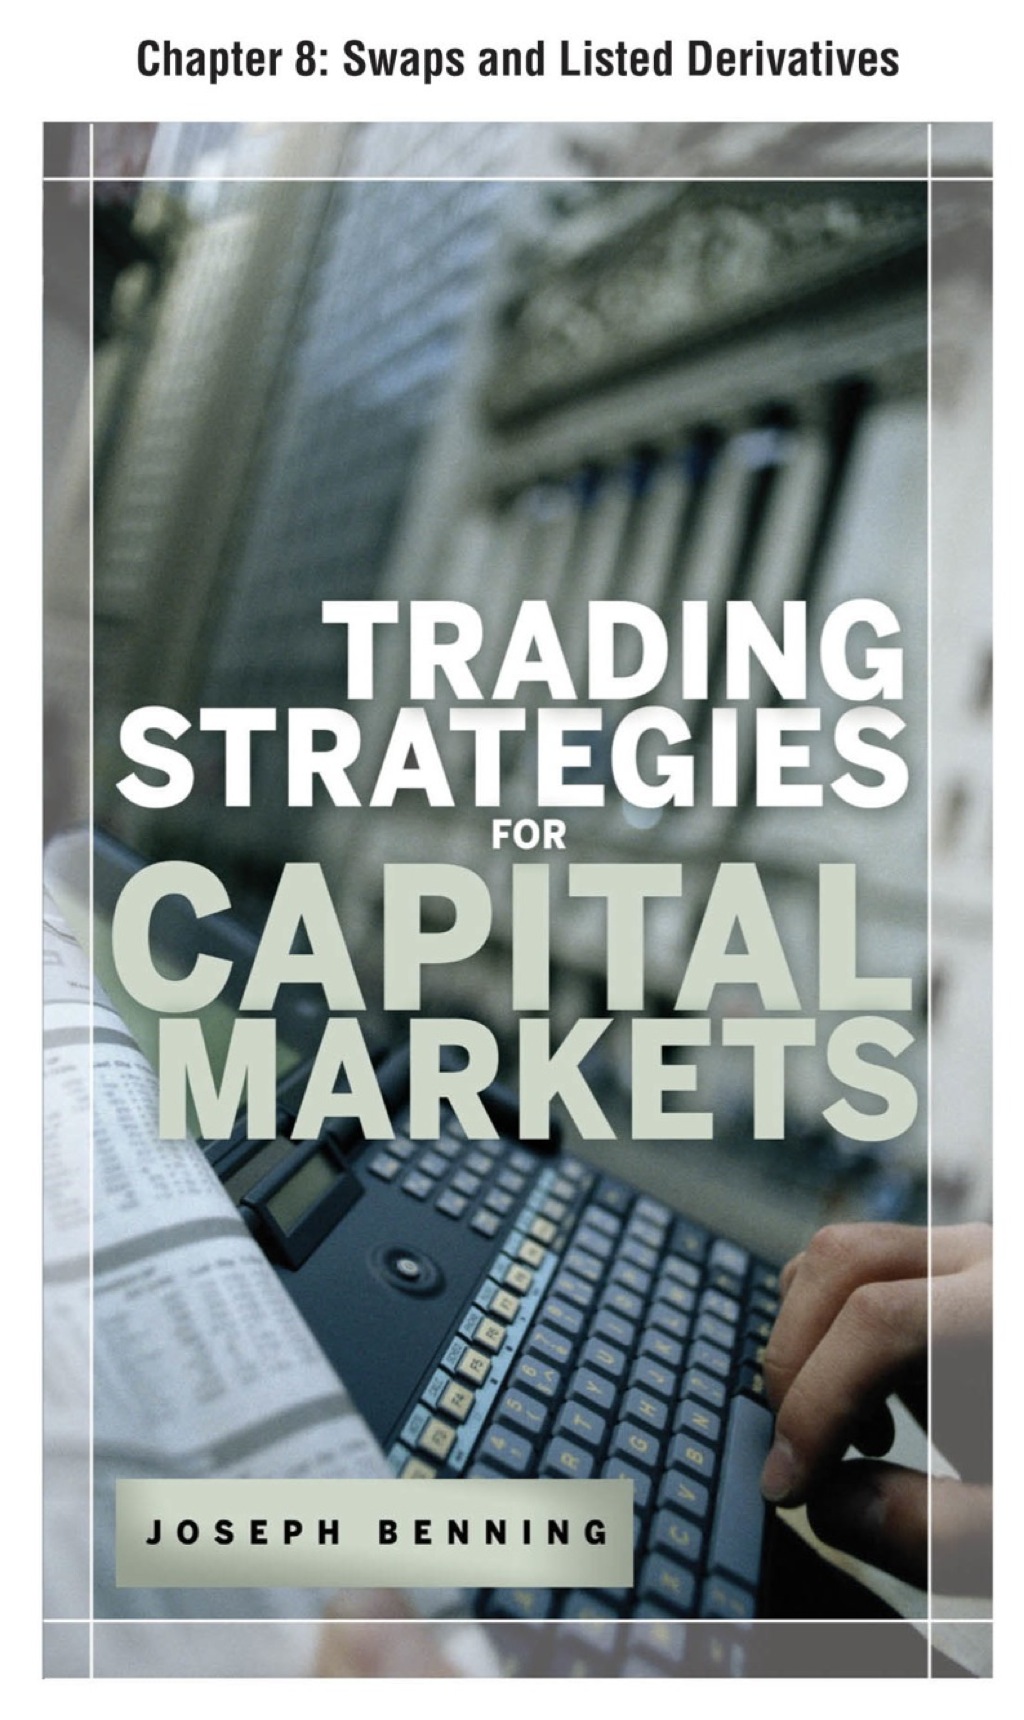 Trading Stategies for Capital Markets  Chapter 8 - Swaps and Listed Derivatives (eBook) - Joseph Benning,